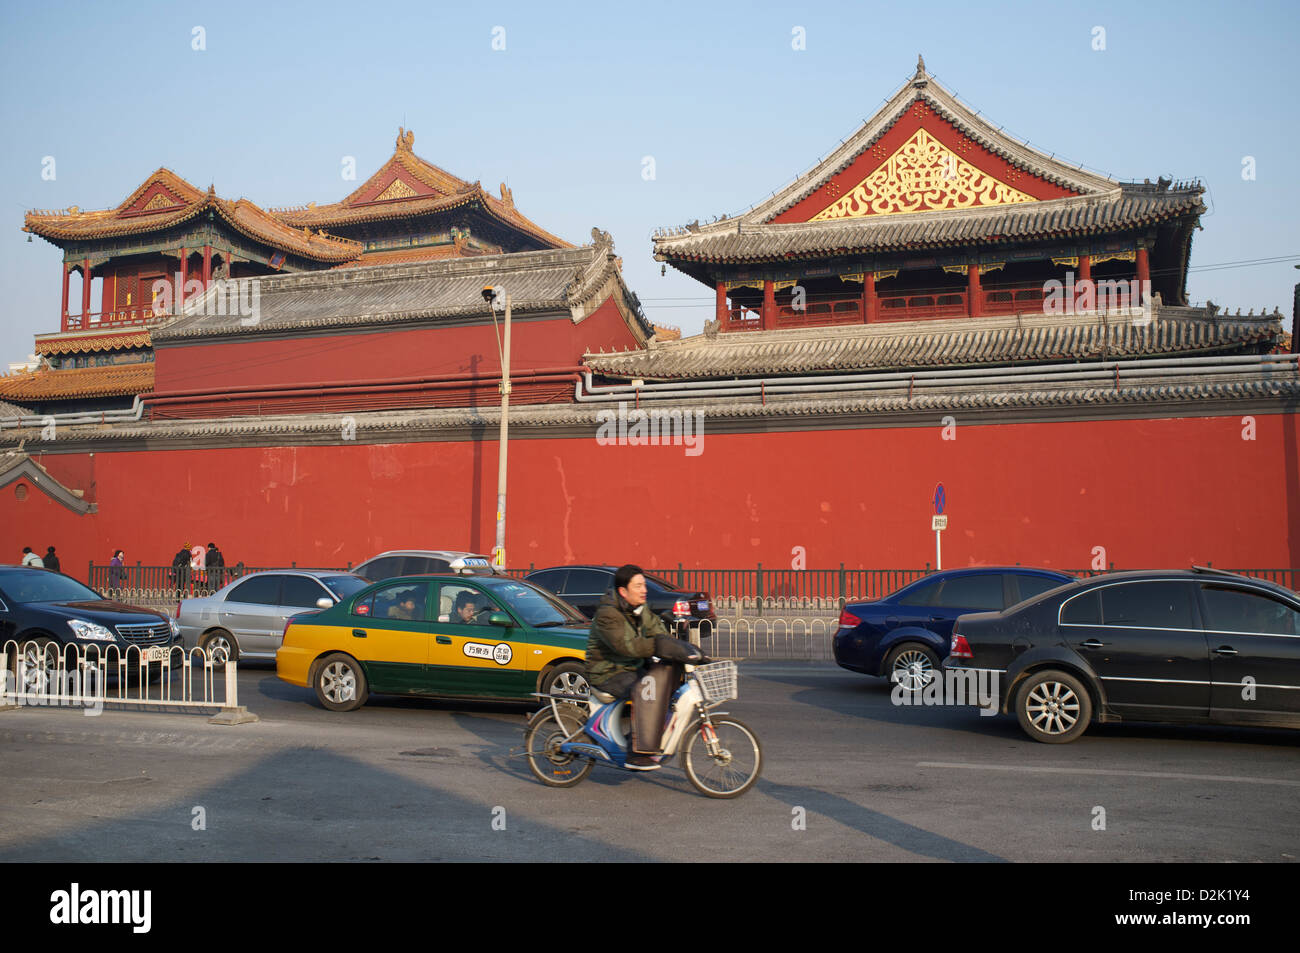 The Yonghe Palace Lamasery, popularly known as the “Lama Temple”, in Beijing, China. 26-Jan-2013 Stock Photo